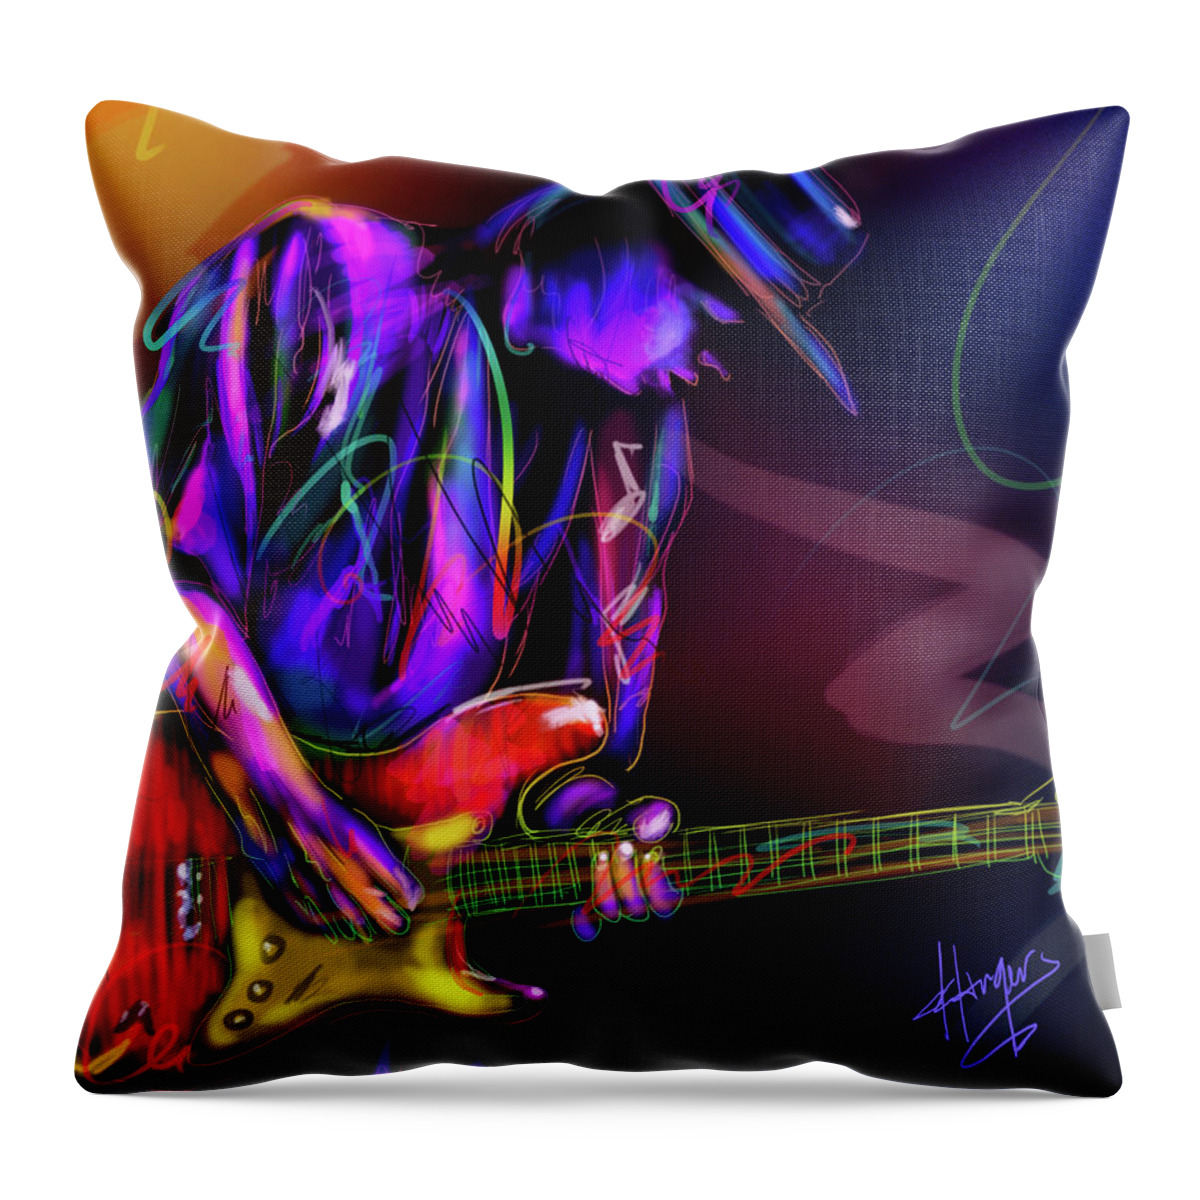 Stevie Ray Vaughan Throw Pillow featuring the painting Stevie Ray Vaughan #2 by DC Langer